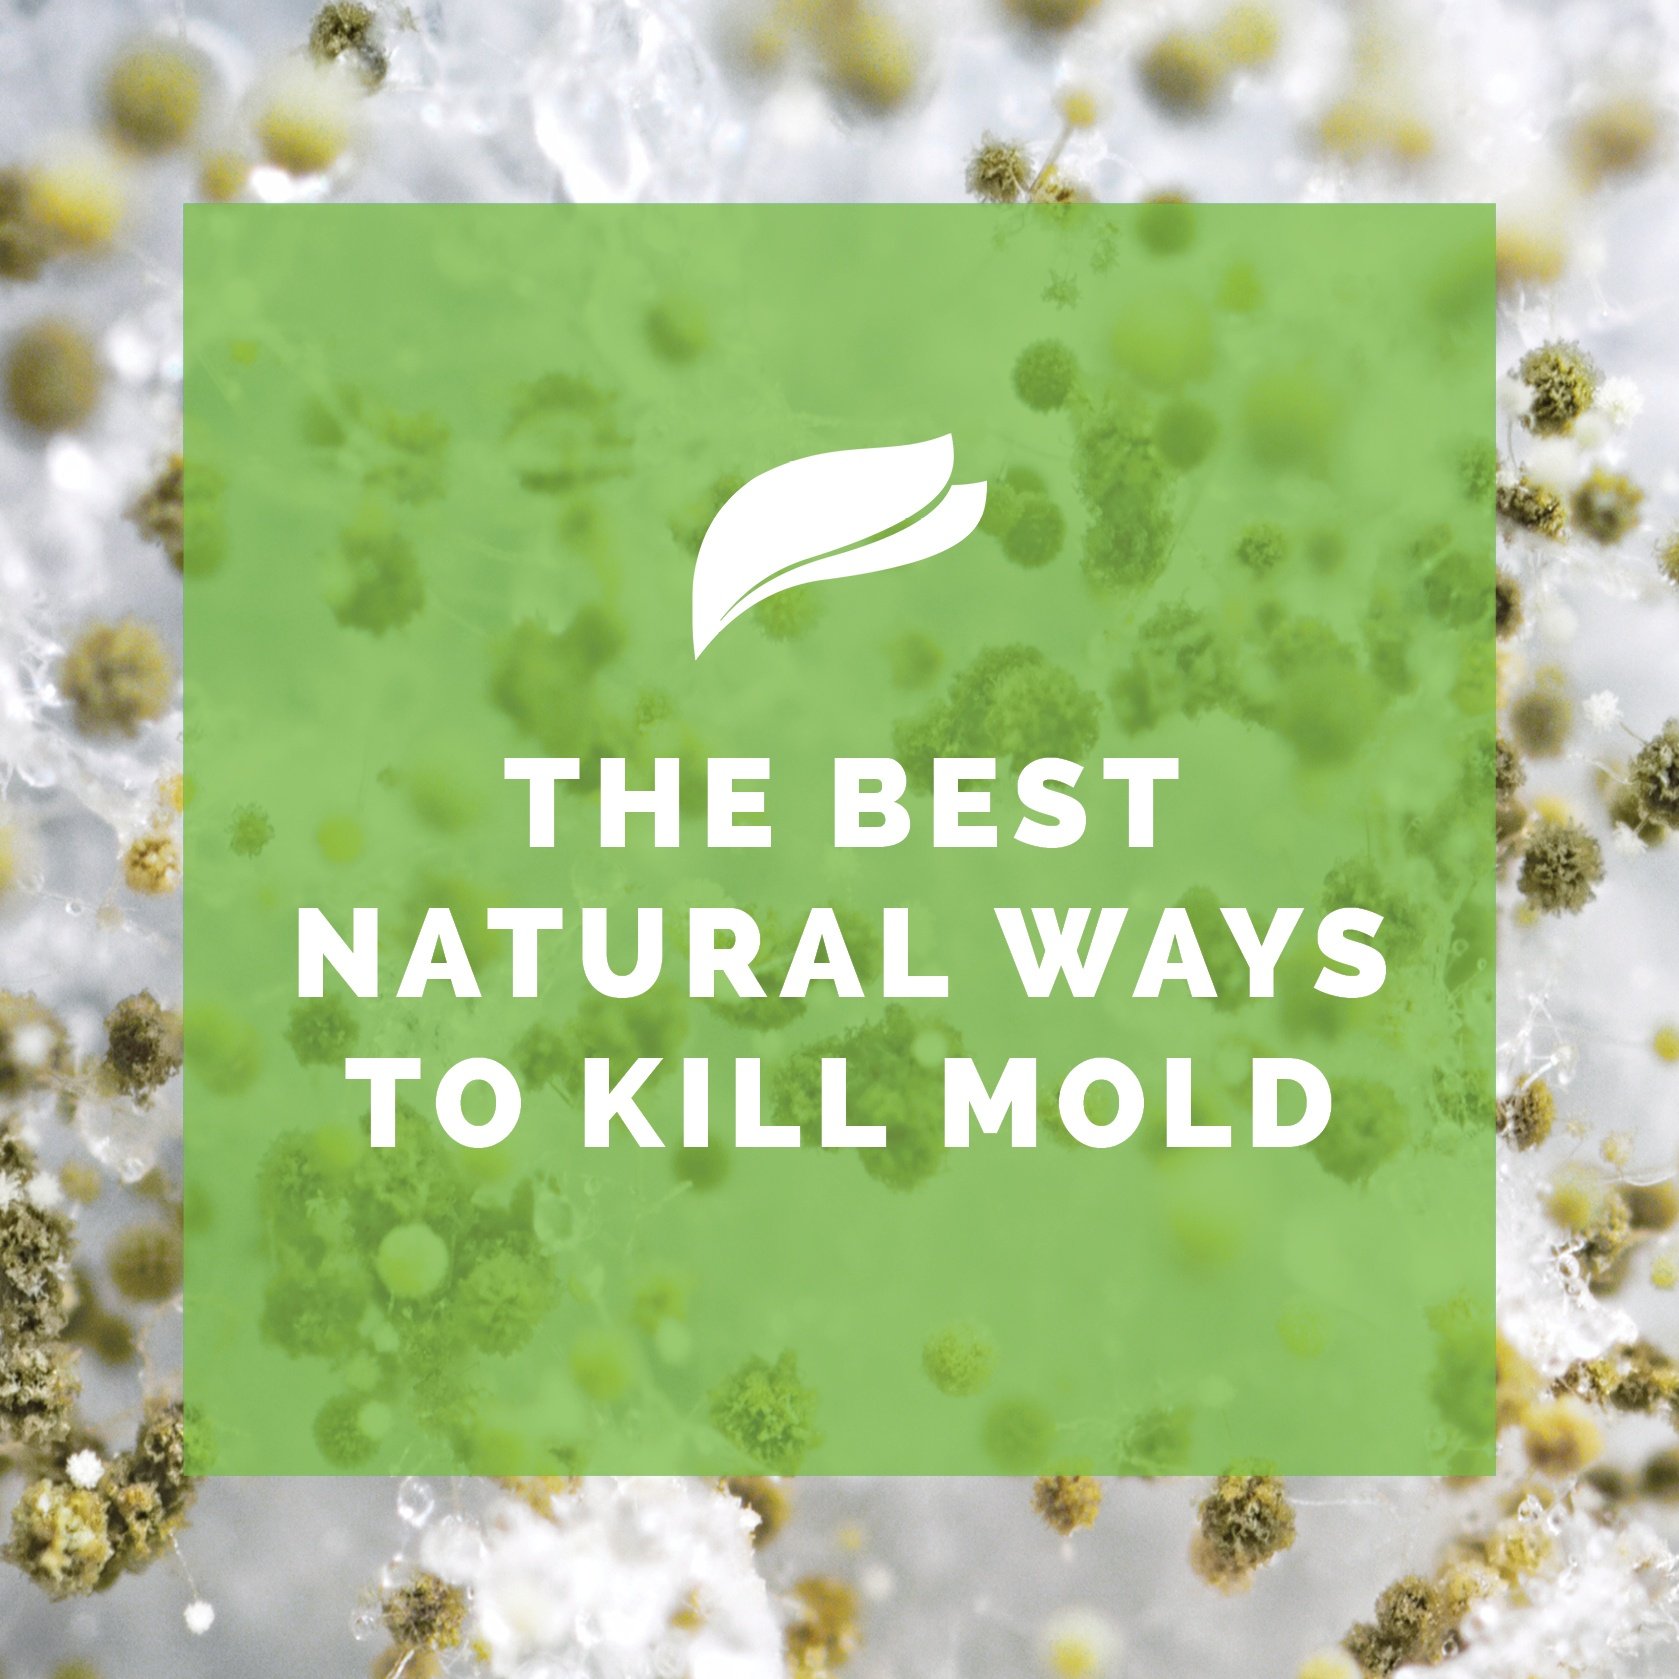 The Best Natural Ways to Kill Mold